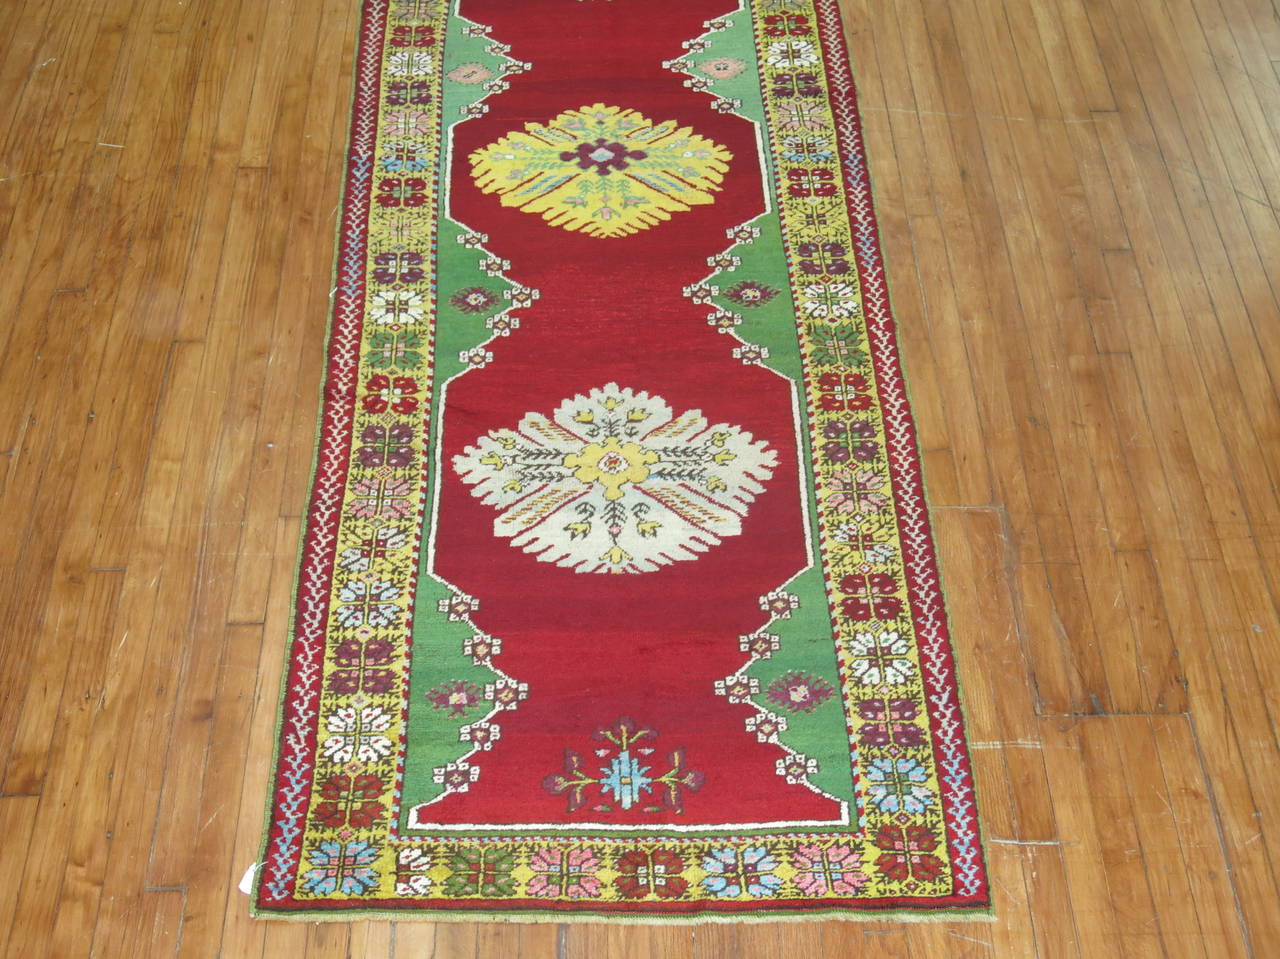 Anglo-Japanese Colorful AntiqueTurkish Melas Runner For Sale